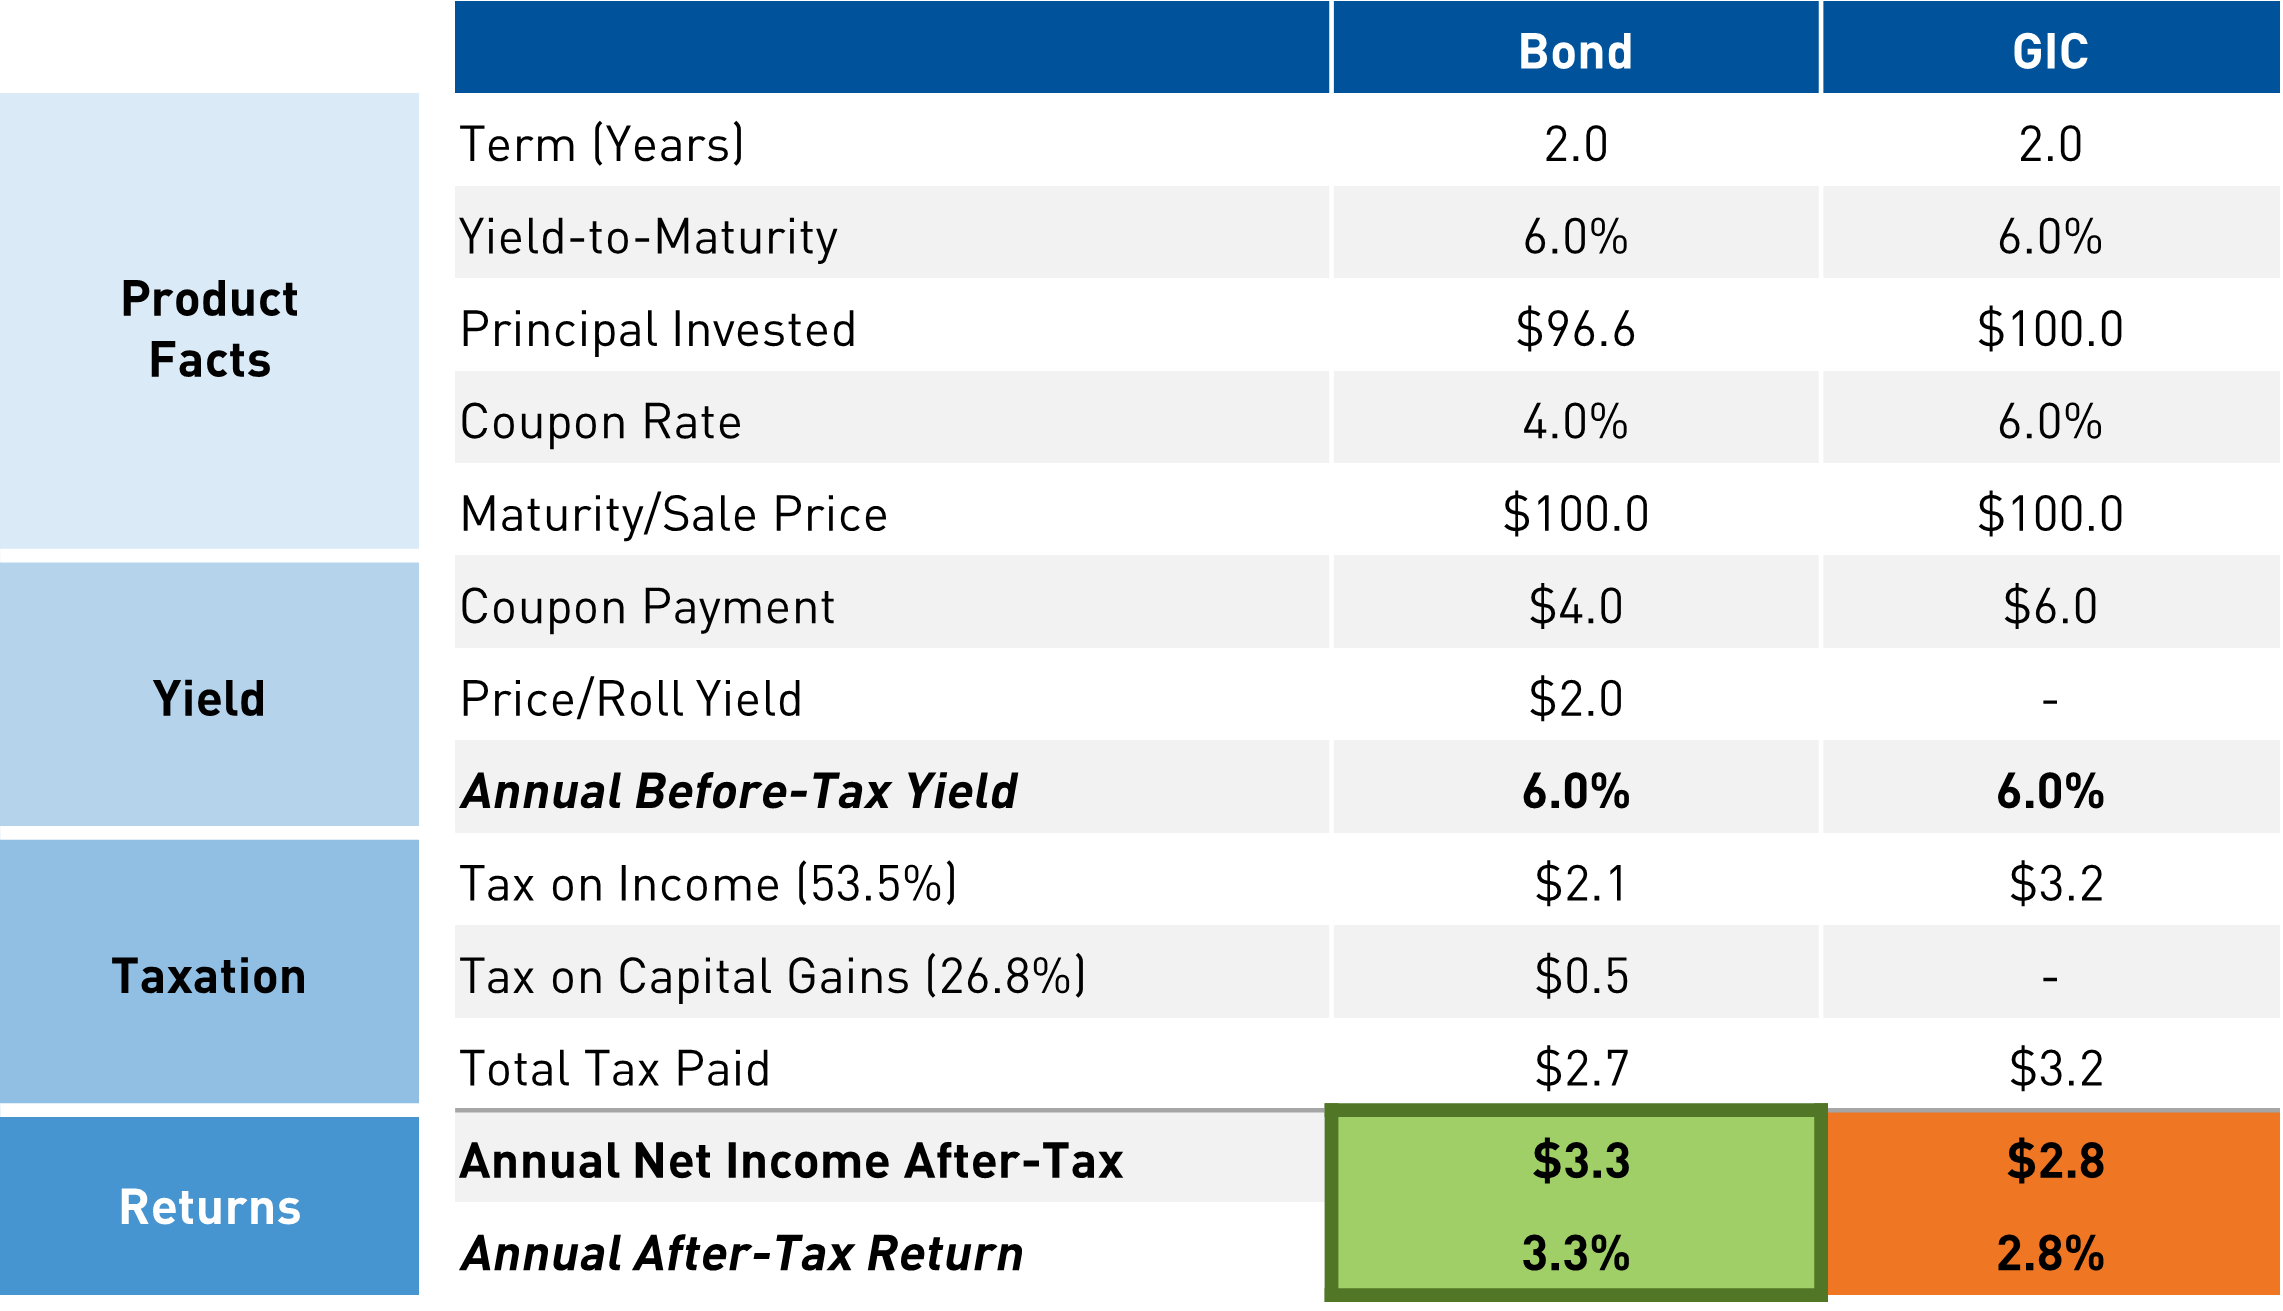 Table showing differences in product facts, yield, taxation, and returns for bonds vs gics